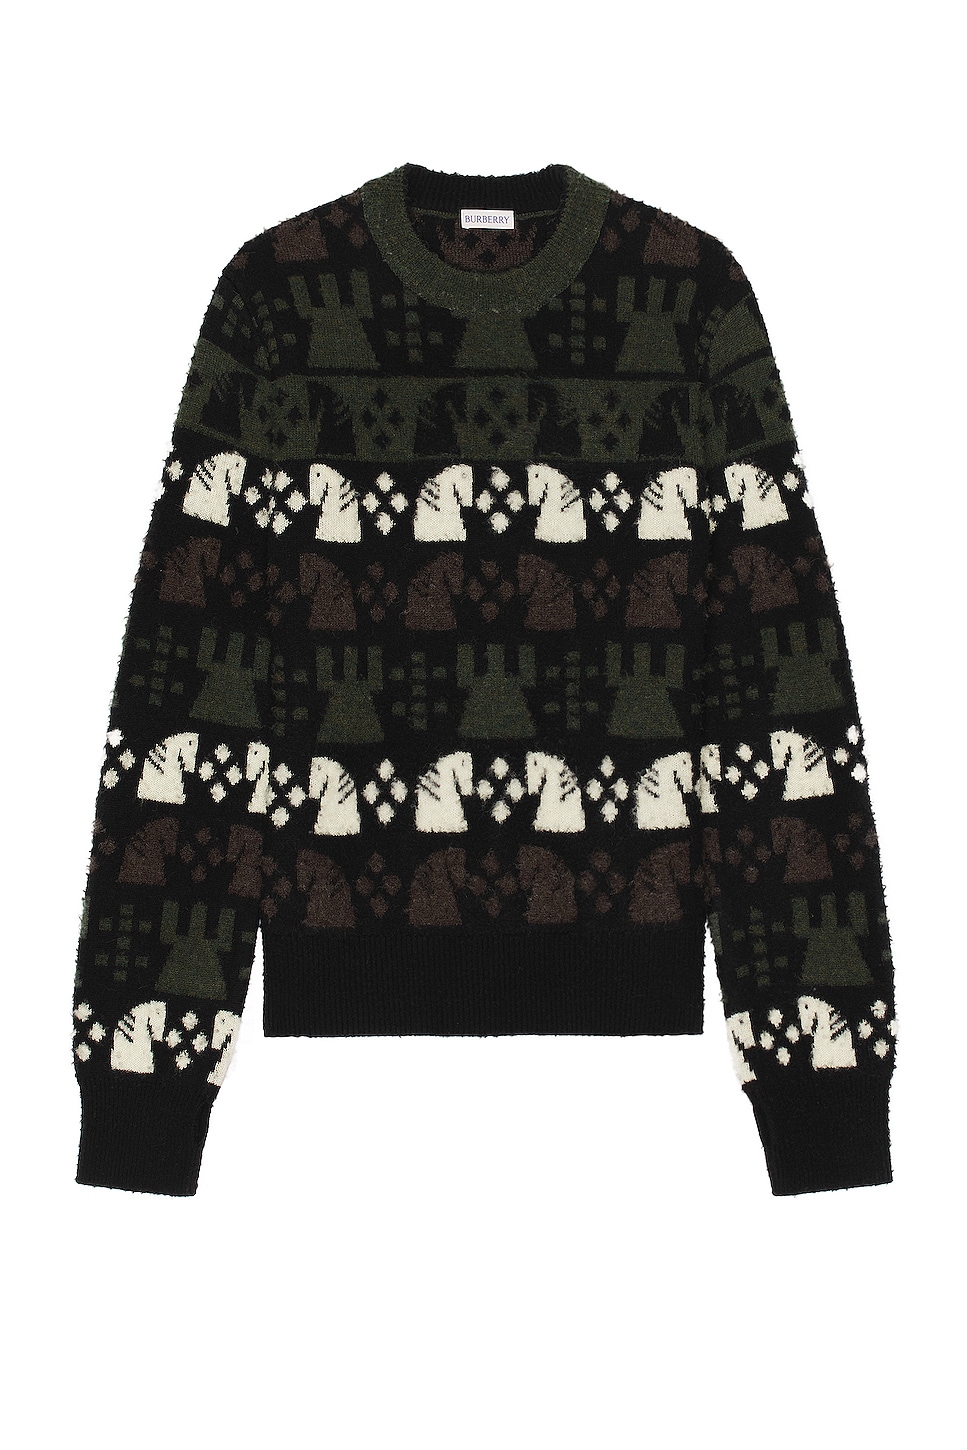 Image 1 of Burberry Pattern Sweater in Black Ip Pat